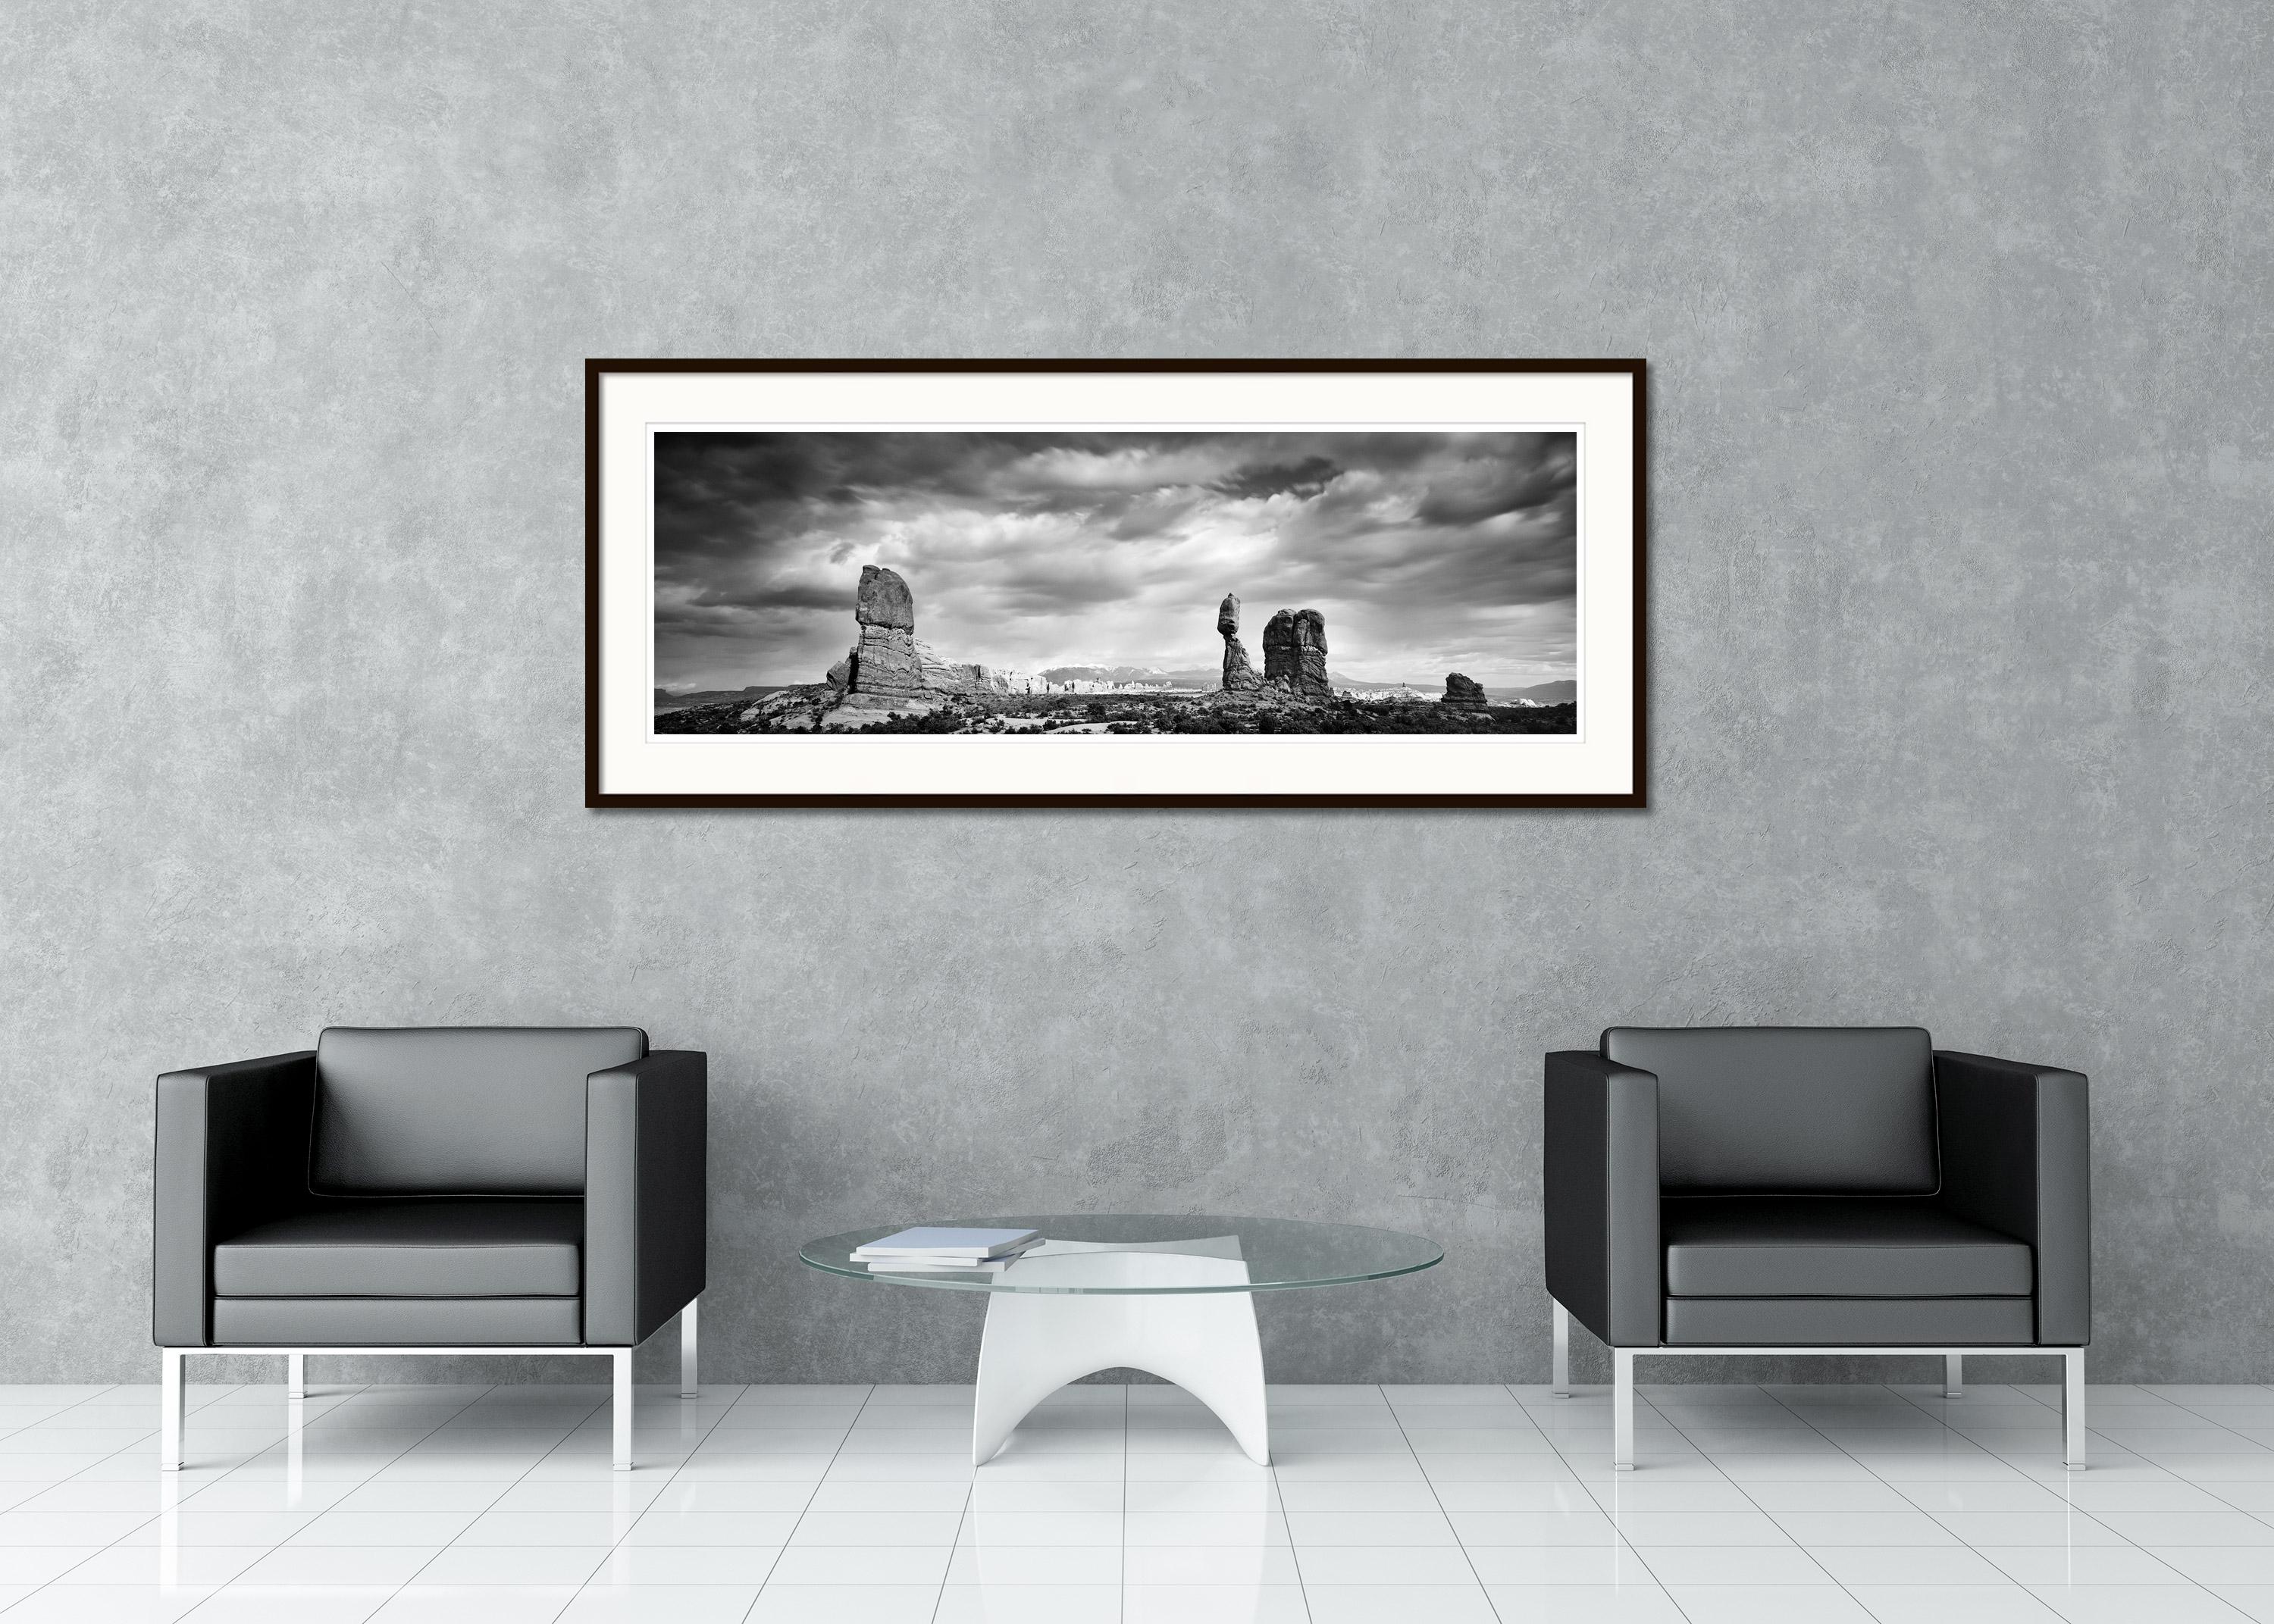 Black and White Fine Art landscape photography. Rock formations in the beautiful arches national park with big clouds, Utah, USA. Archival pigment ink print, edition of 9. Signed, titled, dated and numbered by artist. Certificate of authenticity